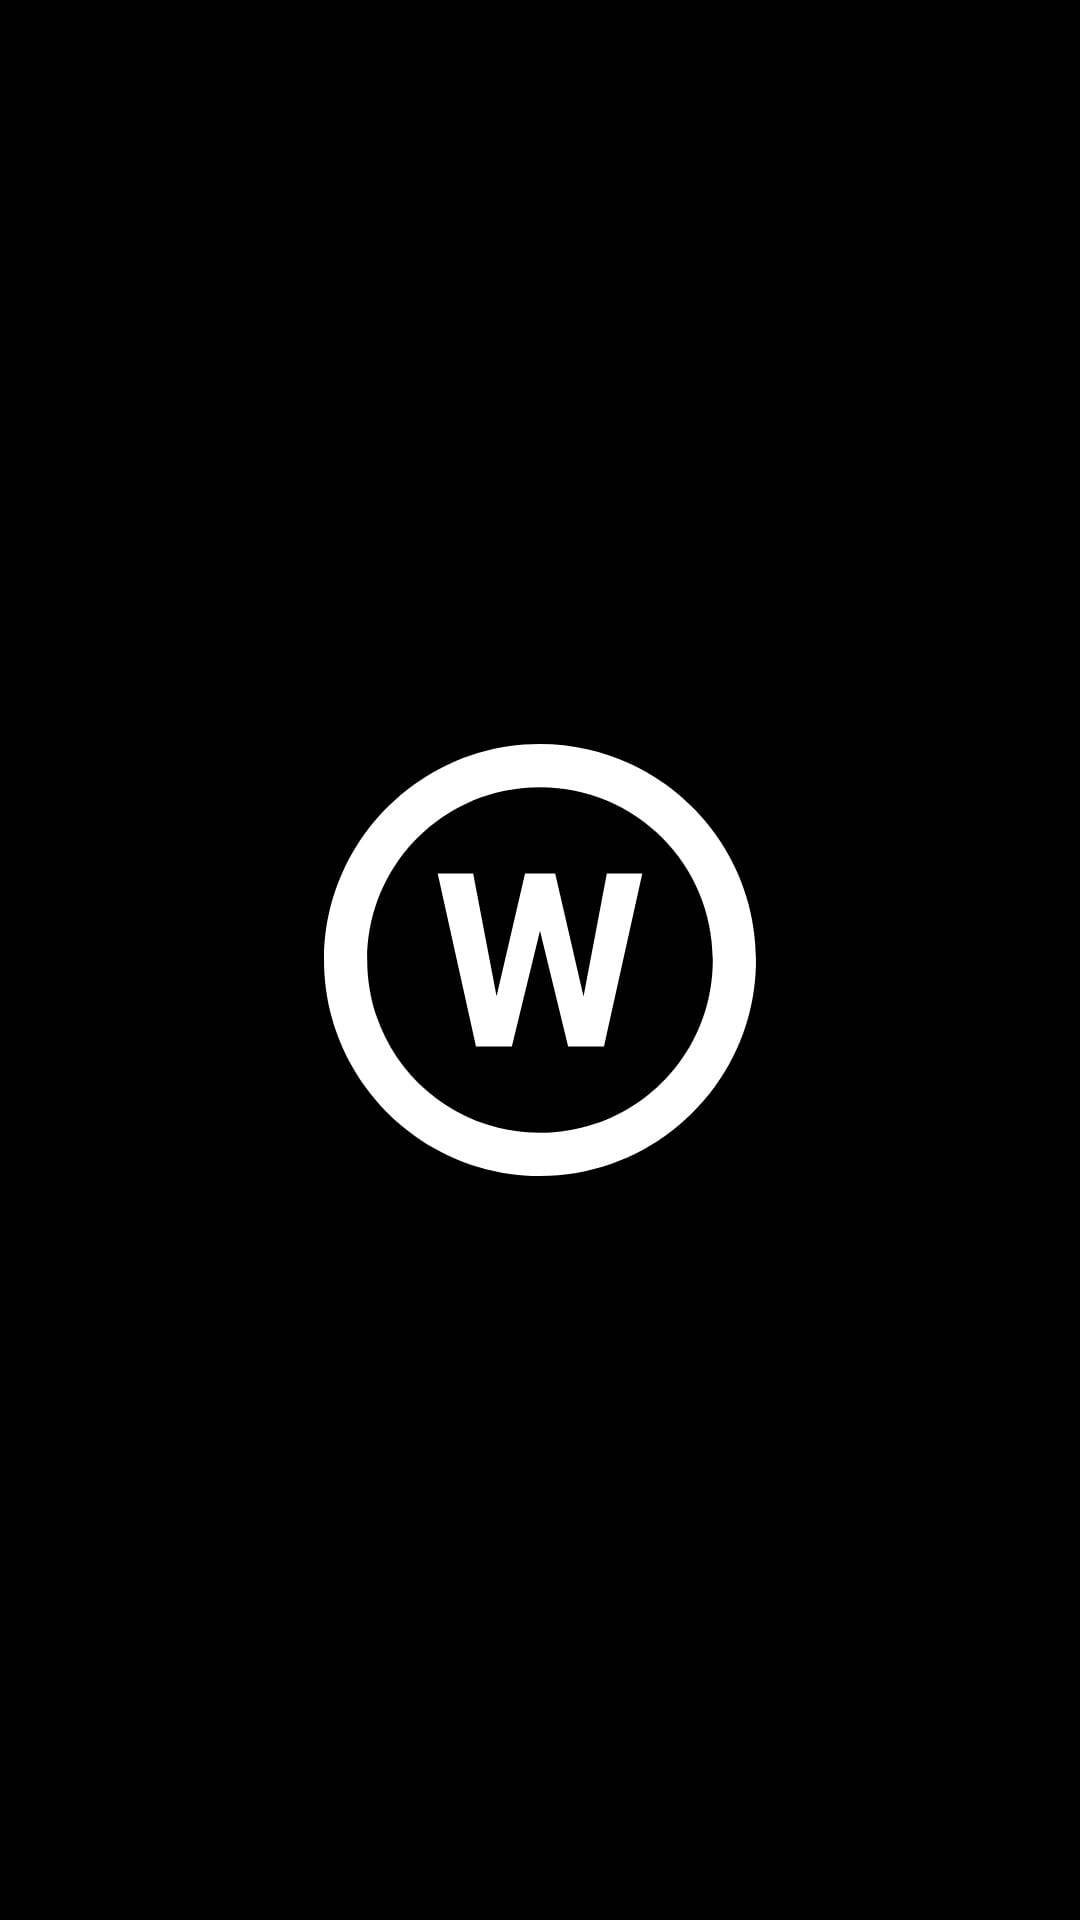 Letter W Inside A Circle